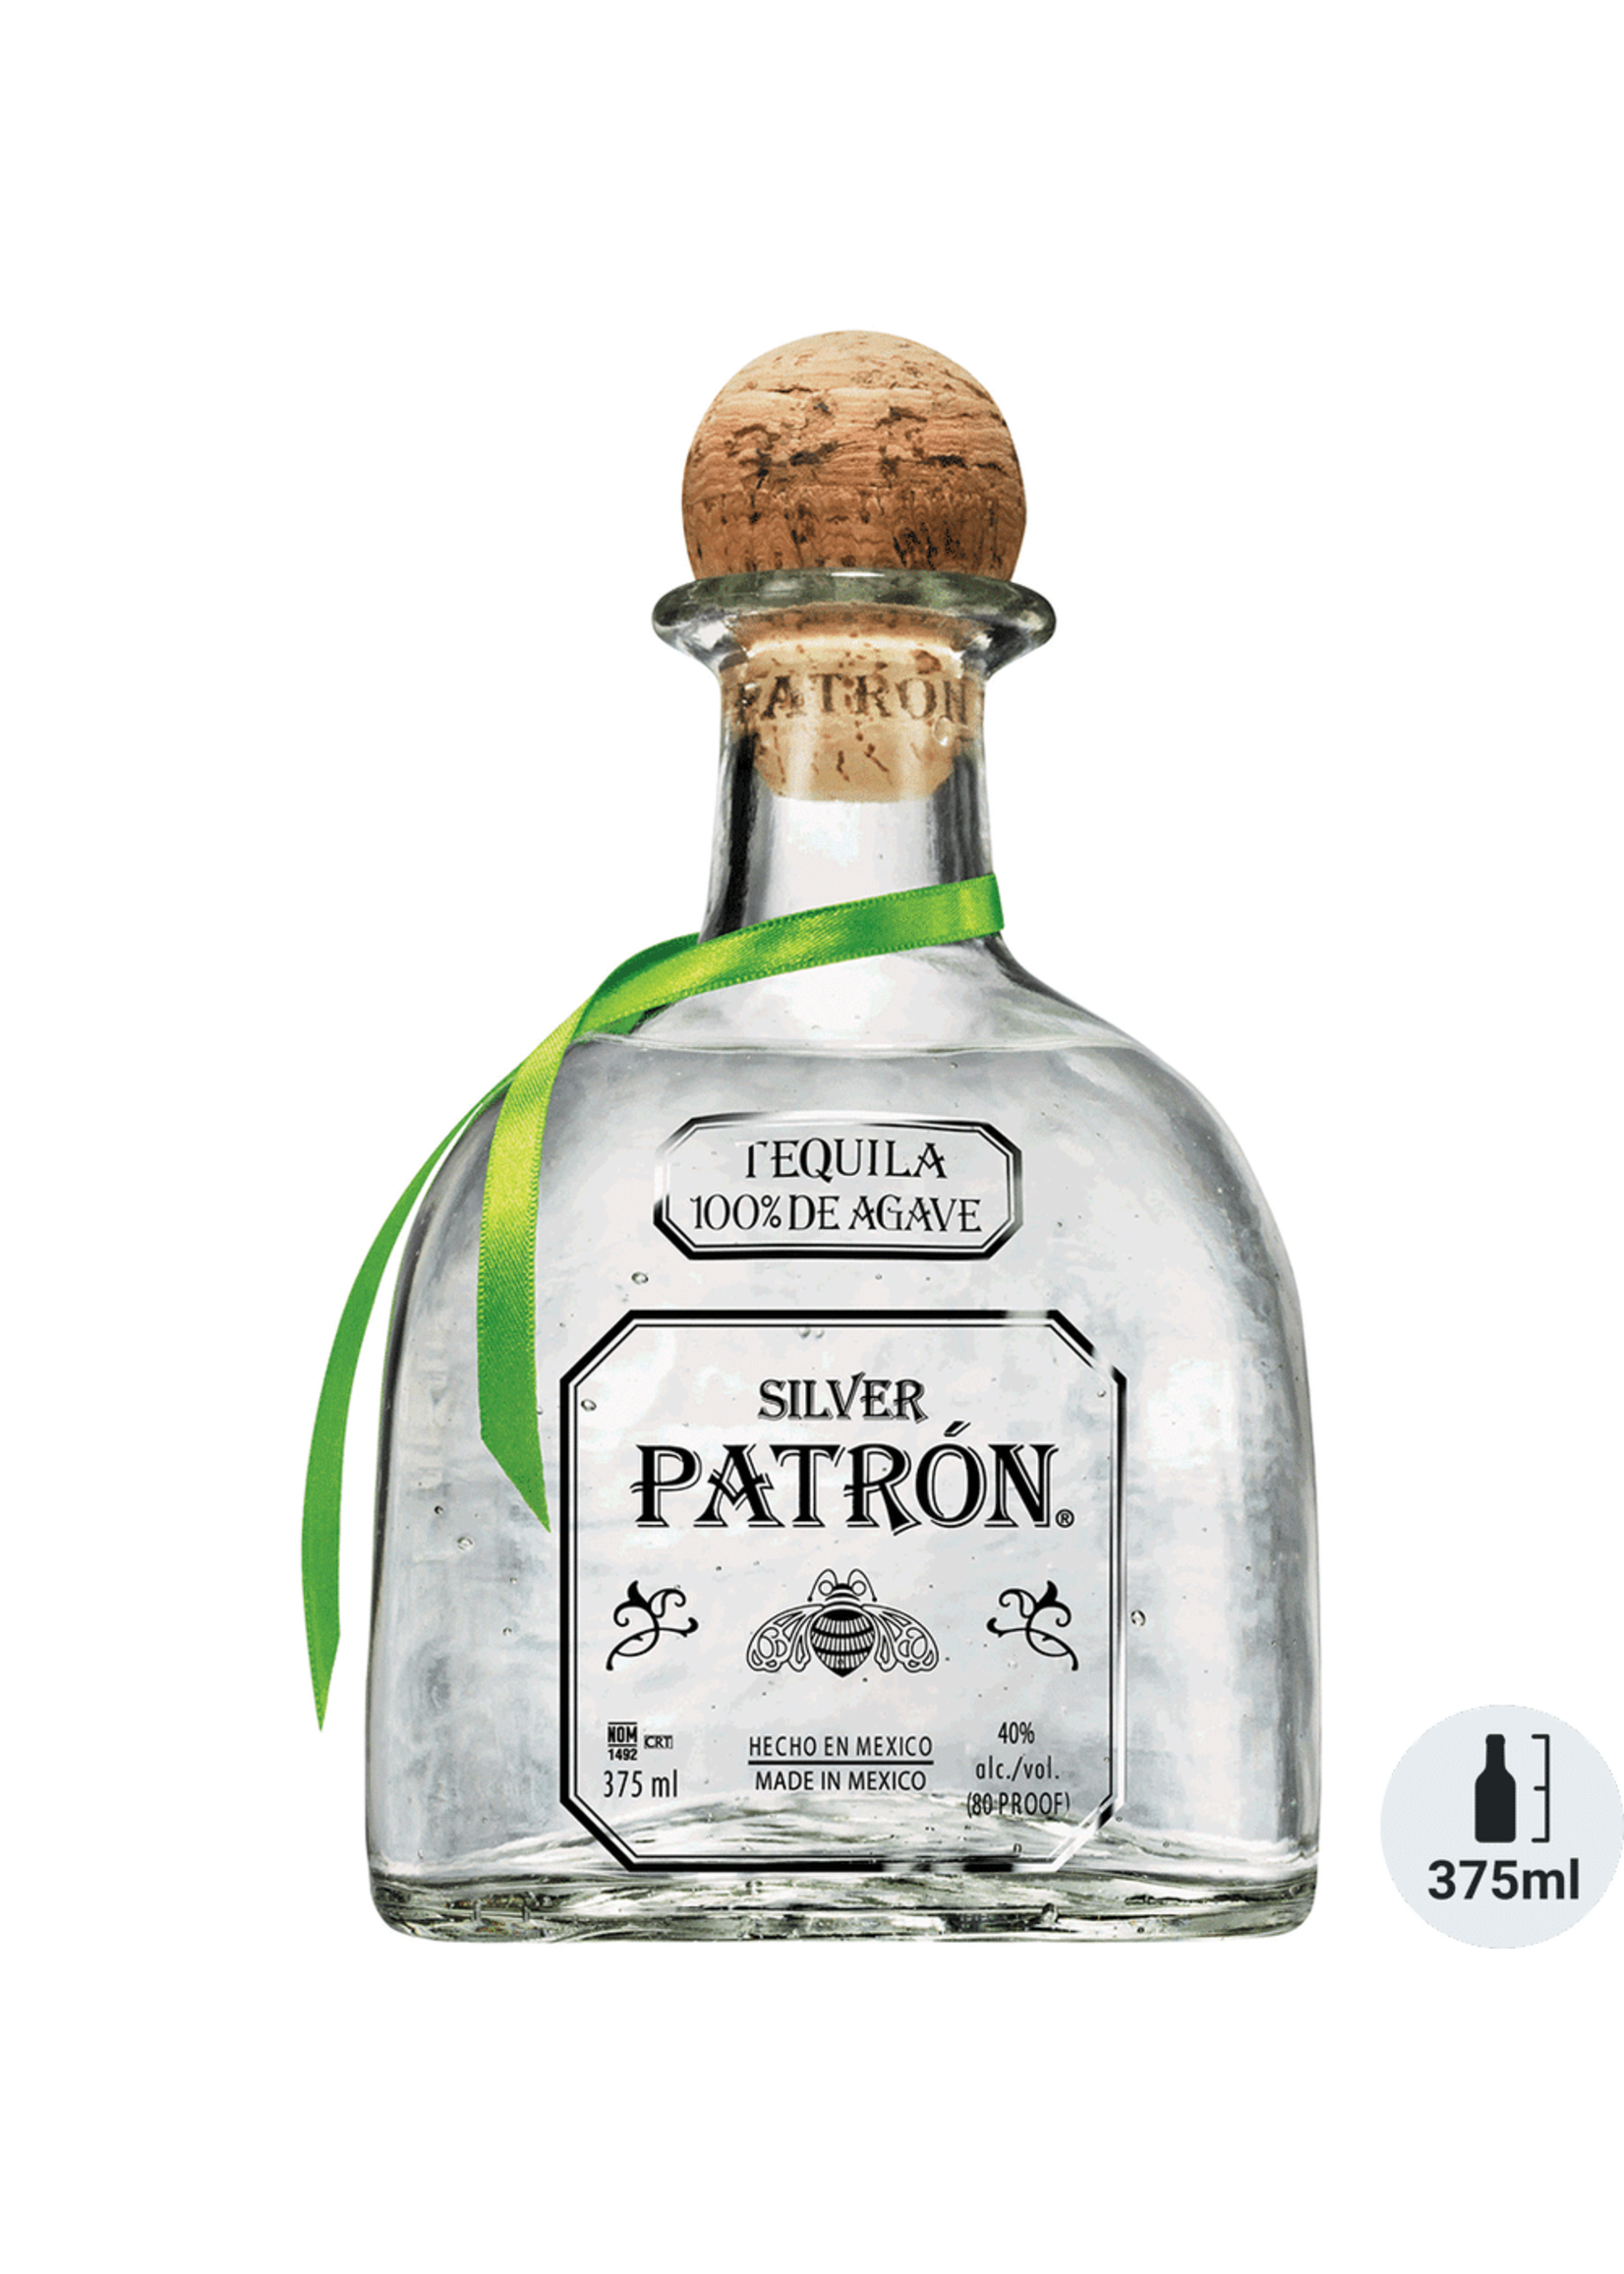 Patron Patron Silver Tequila 80Proof 375ml